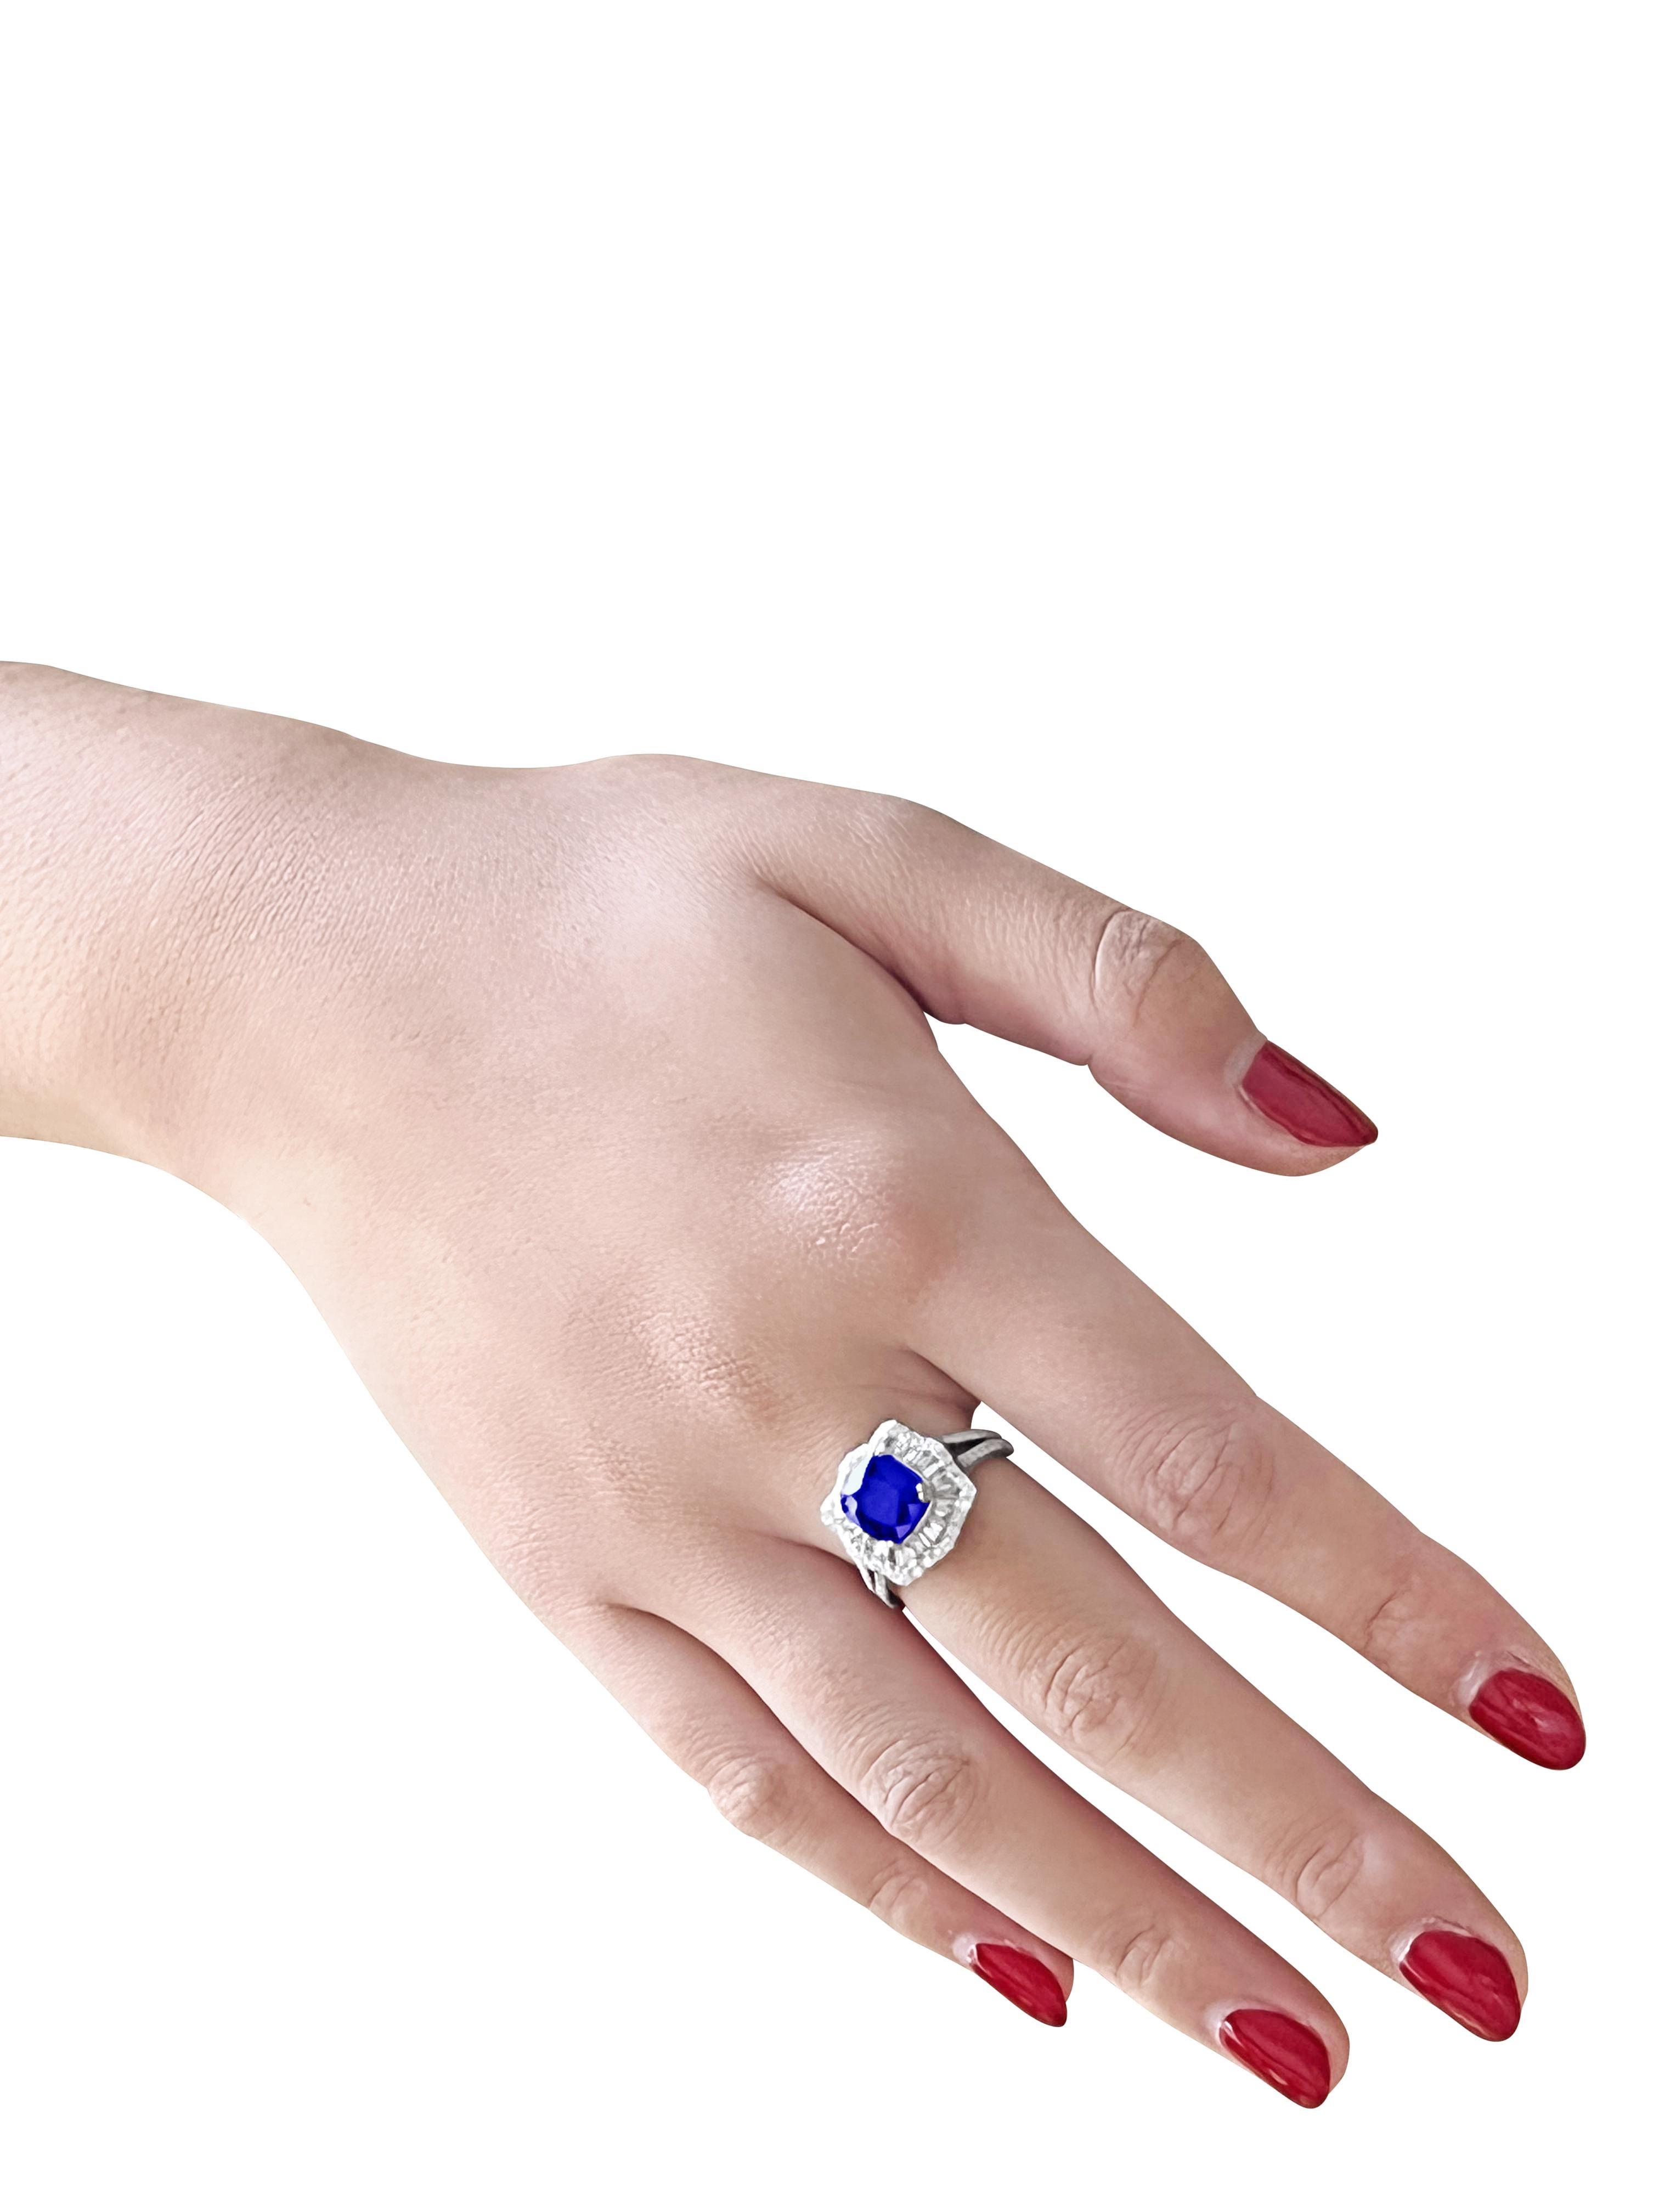 Modern GIA Certified 3.55 Carat Royal Blue Burma Natural Sapphire Diamond Cocktail Ring For Sale